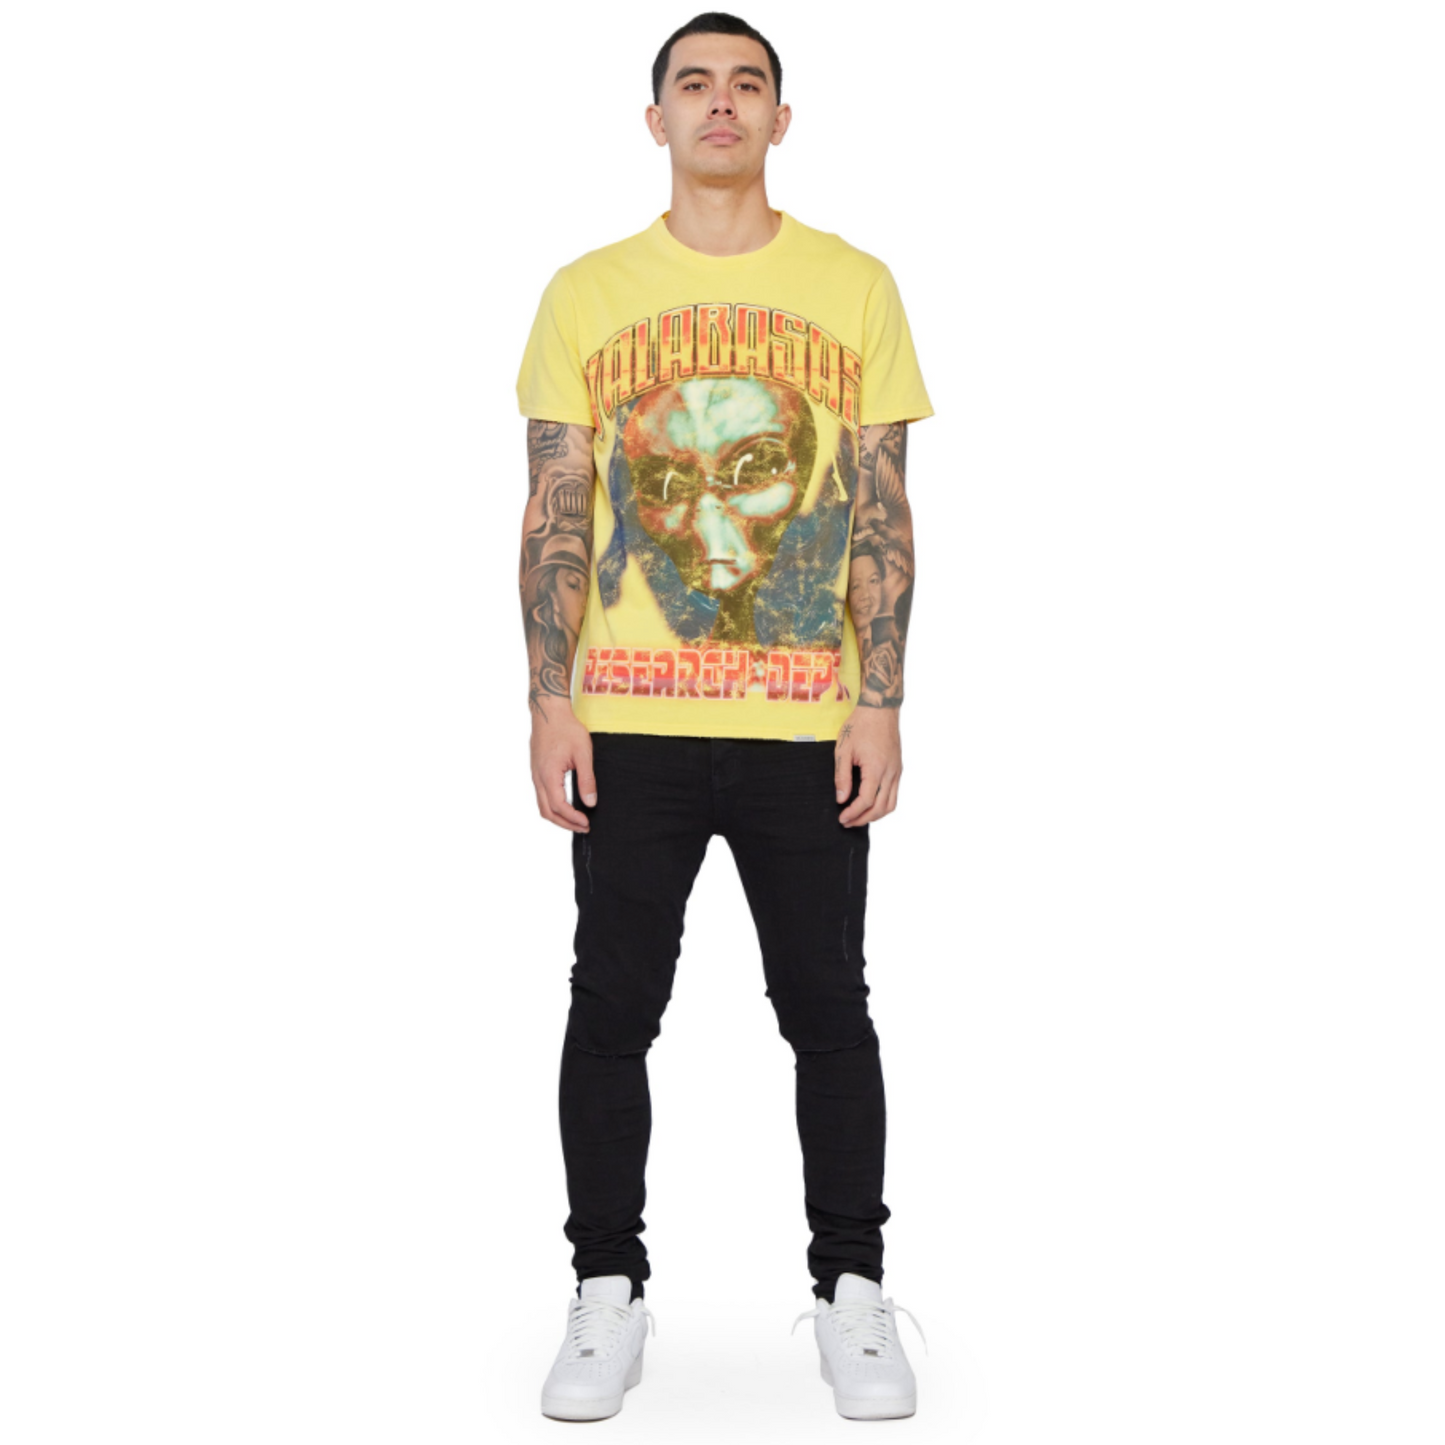 VALABASAS TEE "Come In Peace" VINTAGE YELLOW